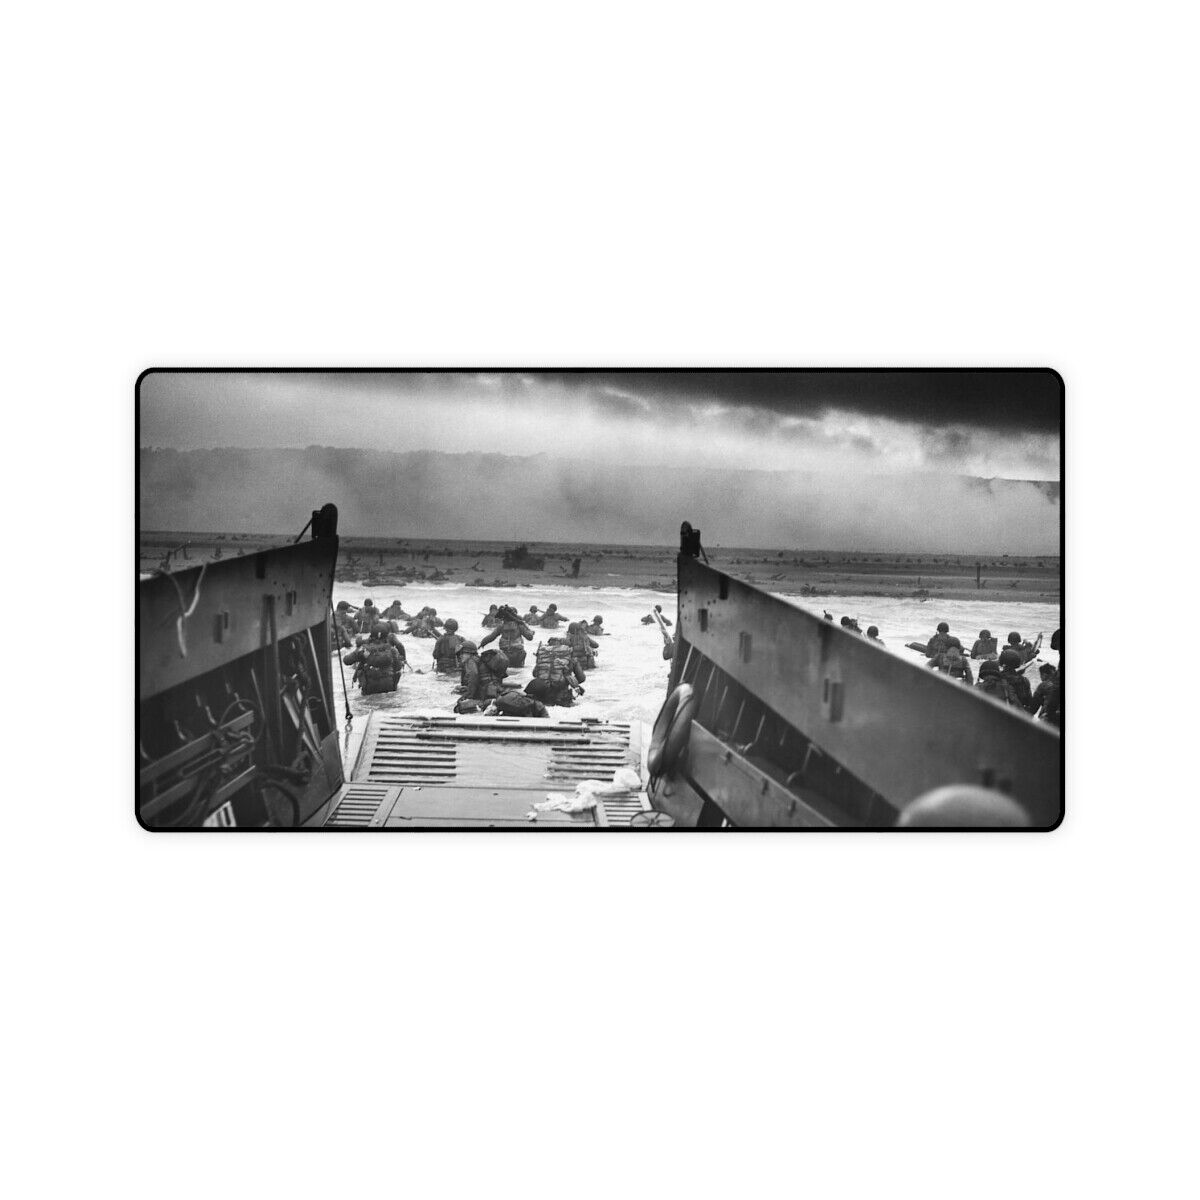 WWII Operation Overlord Normandy Beach D-Day War II - Desk Mat Mouse Pad